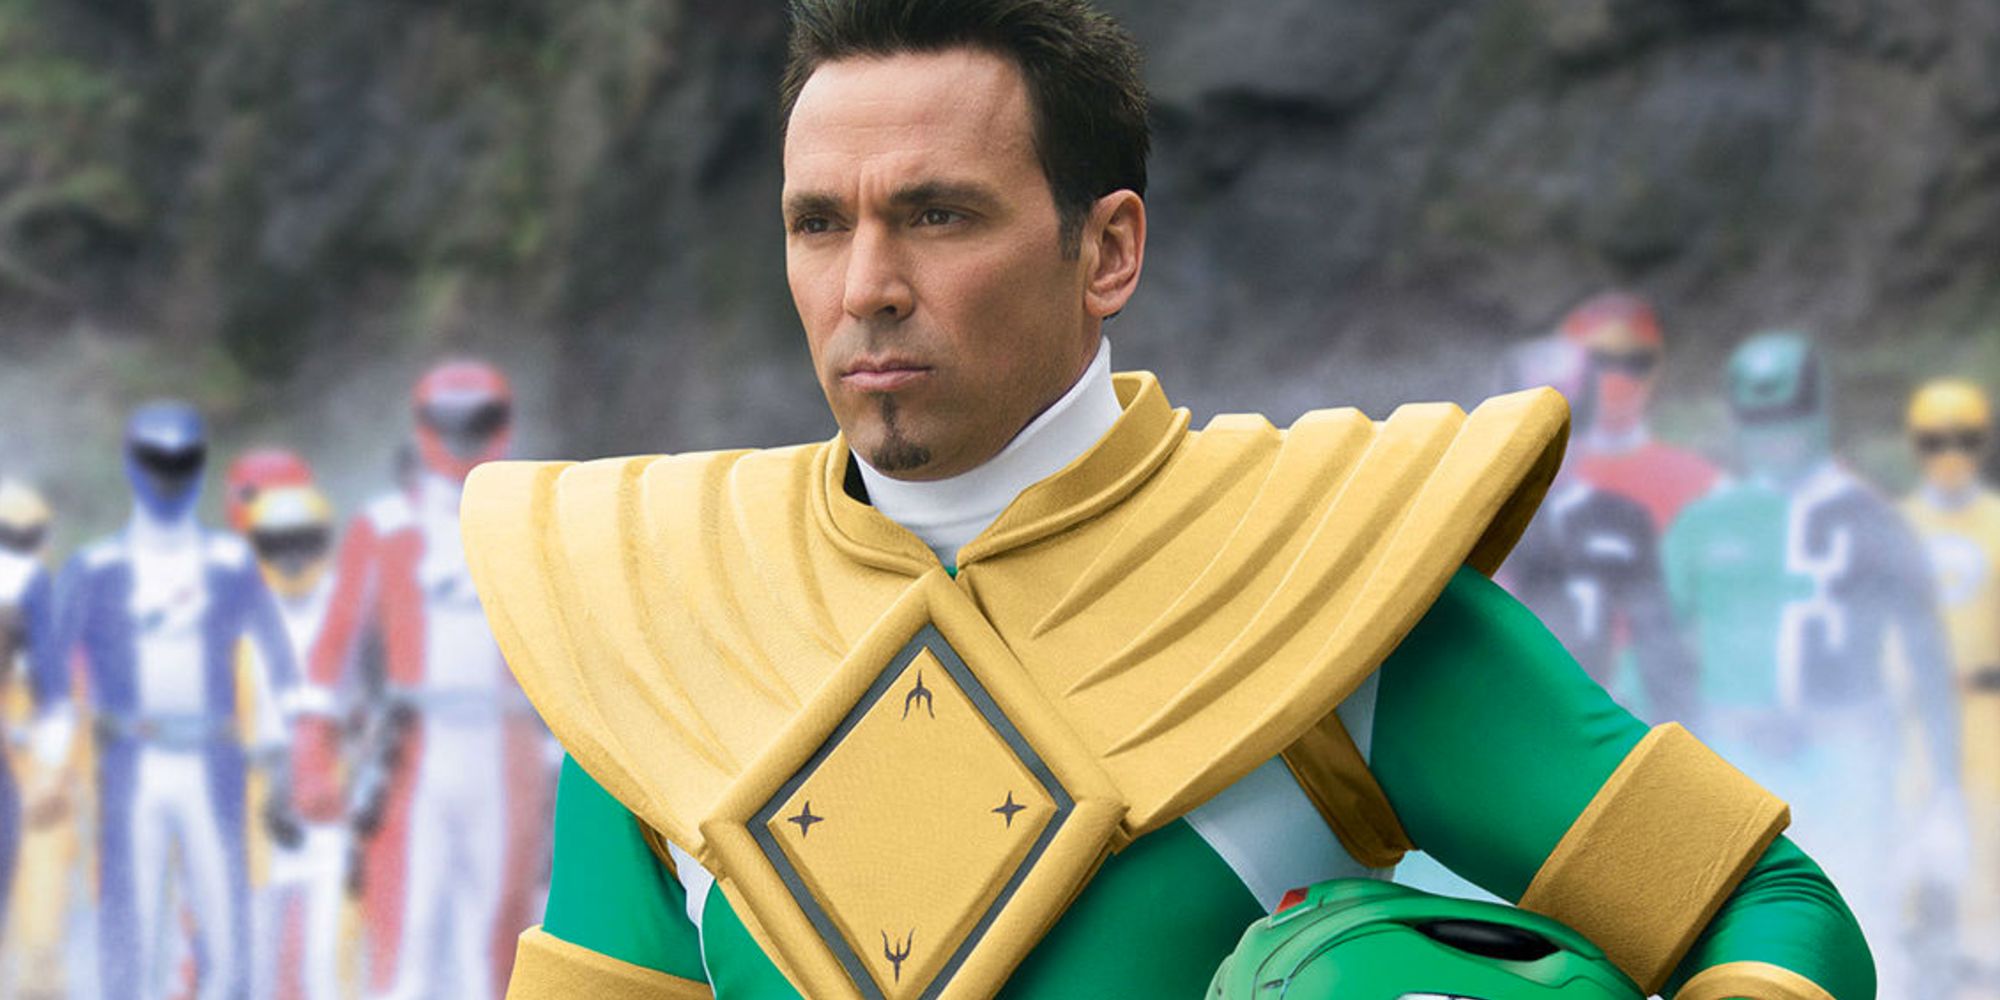 Tommy Oliver ready to lead Rangers into battle in Power Rangers Megaforce